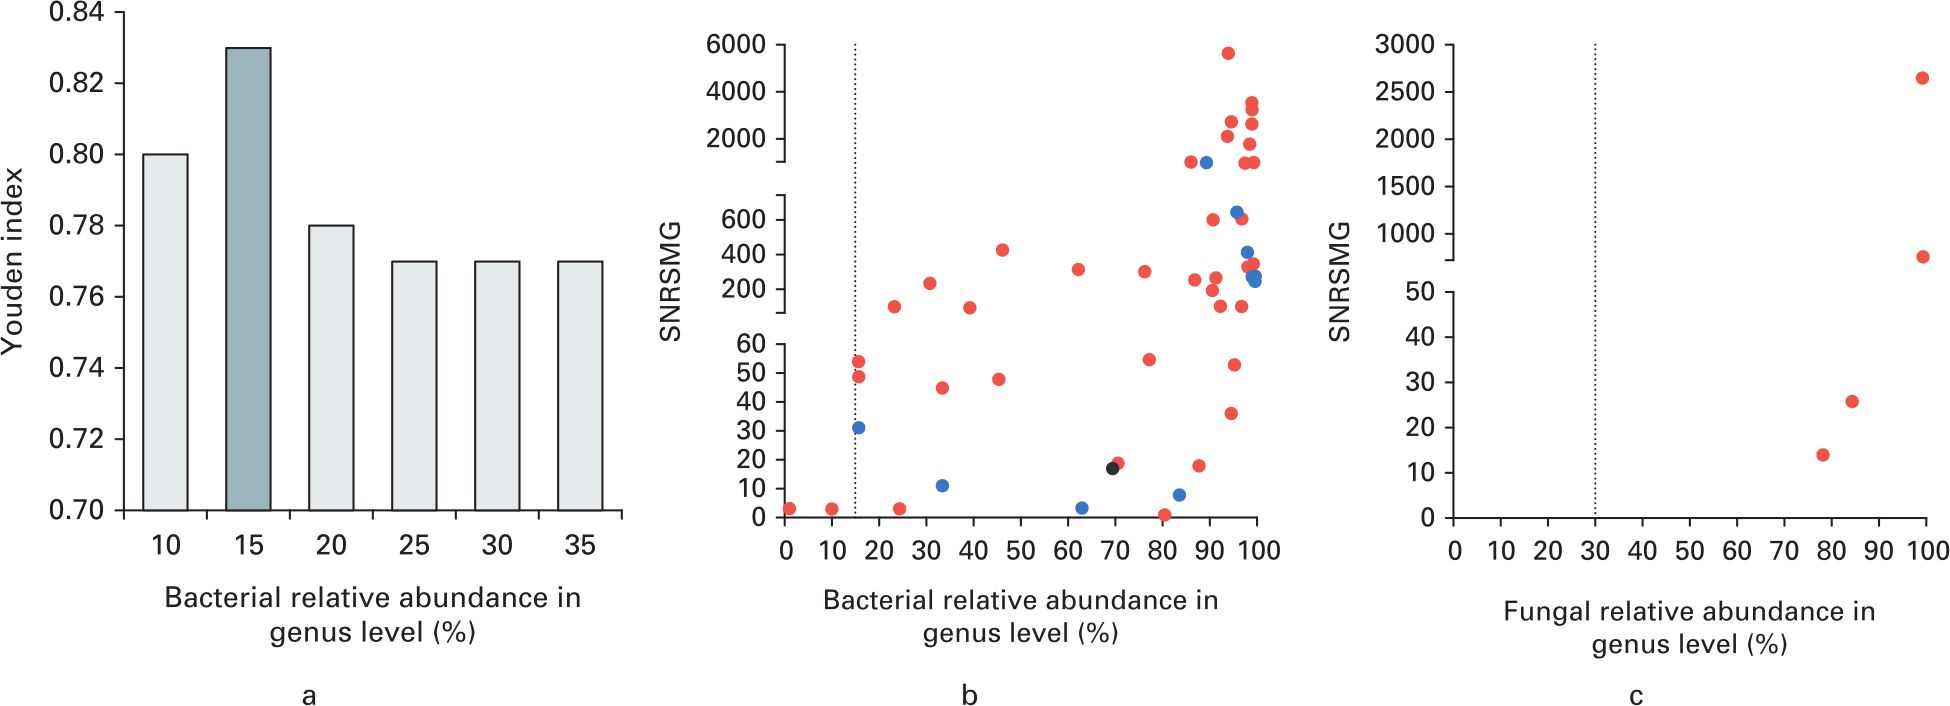 Fig. 2 
            Optimal thresholds for infectious bacteria and fungi identification by metagenomic next-generation sequencing (mNGS). a) Youden index was calculated under different thresholds of relative abundance in genus level. The optimal threshold of bacterial relative abundance in genus level was determined as 15% with highest Youden index. b) Standardized number of reads stringently mapped to pathogen in genus level (SNRSMG) ≥ 3 were recognized as basic inclusive criteria. The graph shows the SNRSMG and relative abundance of bacteria genus (excluding Mycobacteria and Burkholderia), which were interpreted as potential pathogens by mNGS. Red dots indicate culture-positive bacteria identified by mNGS. Blue dots indicate bacteria genera that contained the highest relative abundance in samples of culture-negative prosthetic joint infection. Black dots indicate bacteria genera that contained the highest relative abundance in samples from the noninfection group. The vertical dotted line indicates the optimal threshold of bacterial relative abundance in genus level was determined as 15%. c) SNRSMG and relative abundance of fungal genera that were interpreted as potential pathogens by mNGS. Red dots indicate culture-positive fungi identified by mNGS. The vertical dotted line indicates the optimal threshold of fungal relative abundance in genus level was determined as 30%.
          